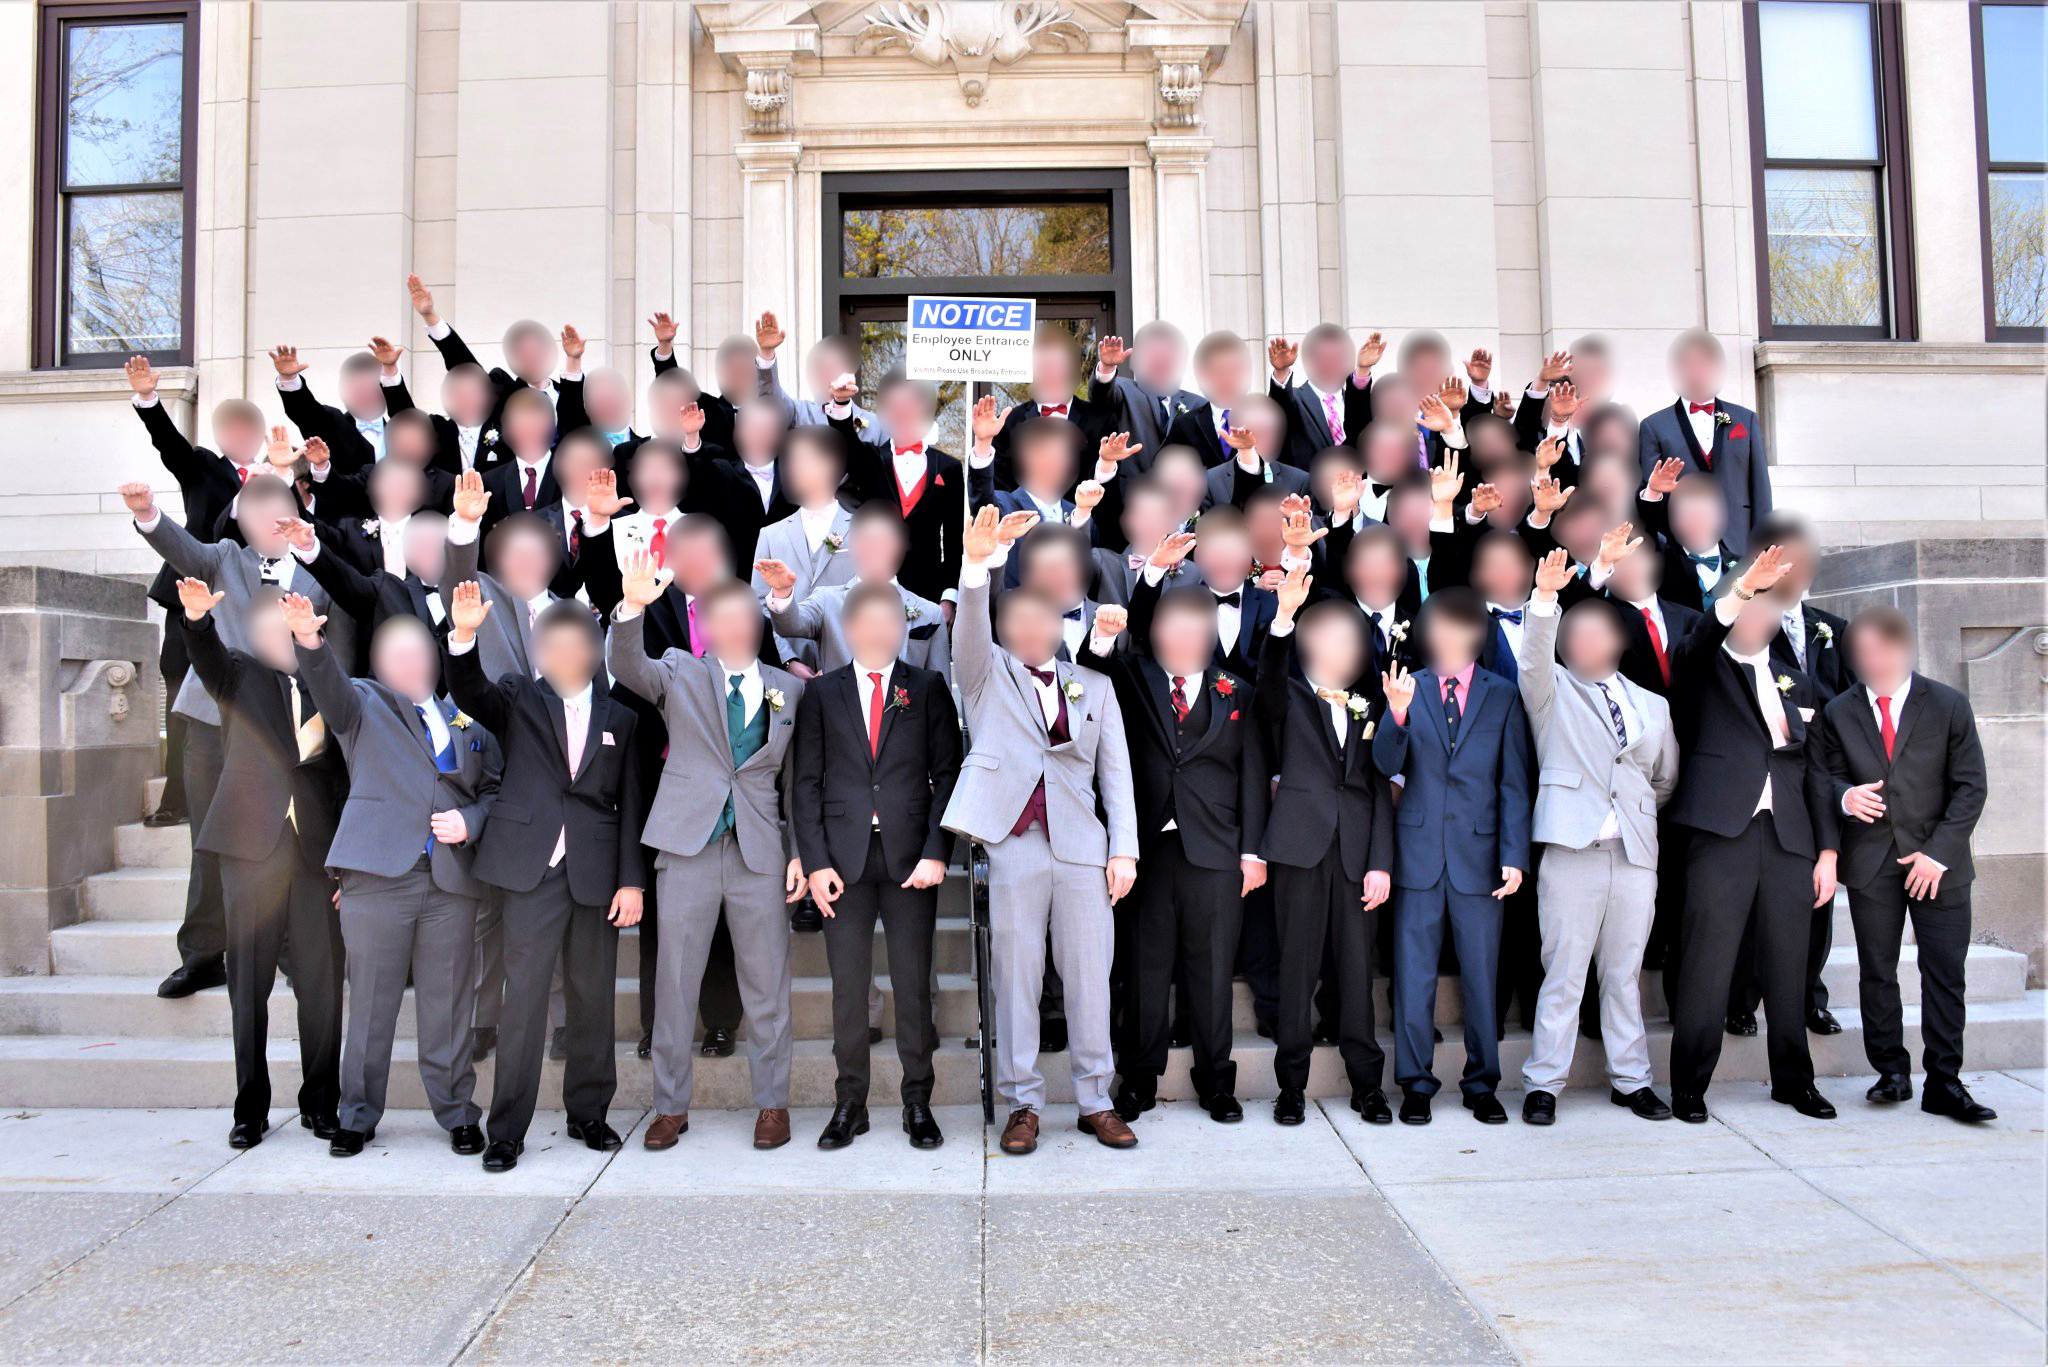 PHOTO: A group of Baraboo High School students in Wisconsin appear to pose in a Nazi salute, while posing for prom pictures in Spring 2018.